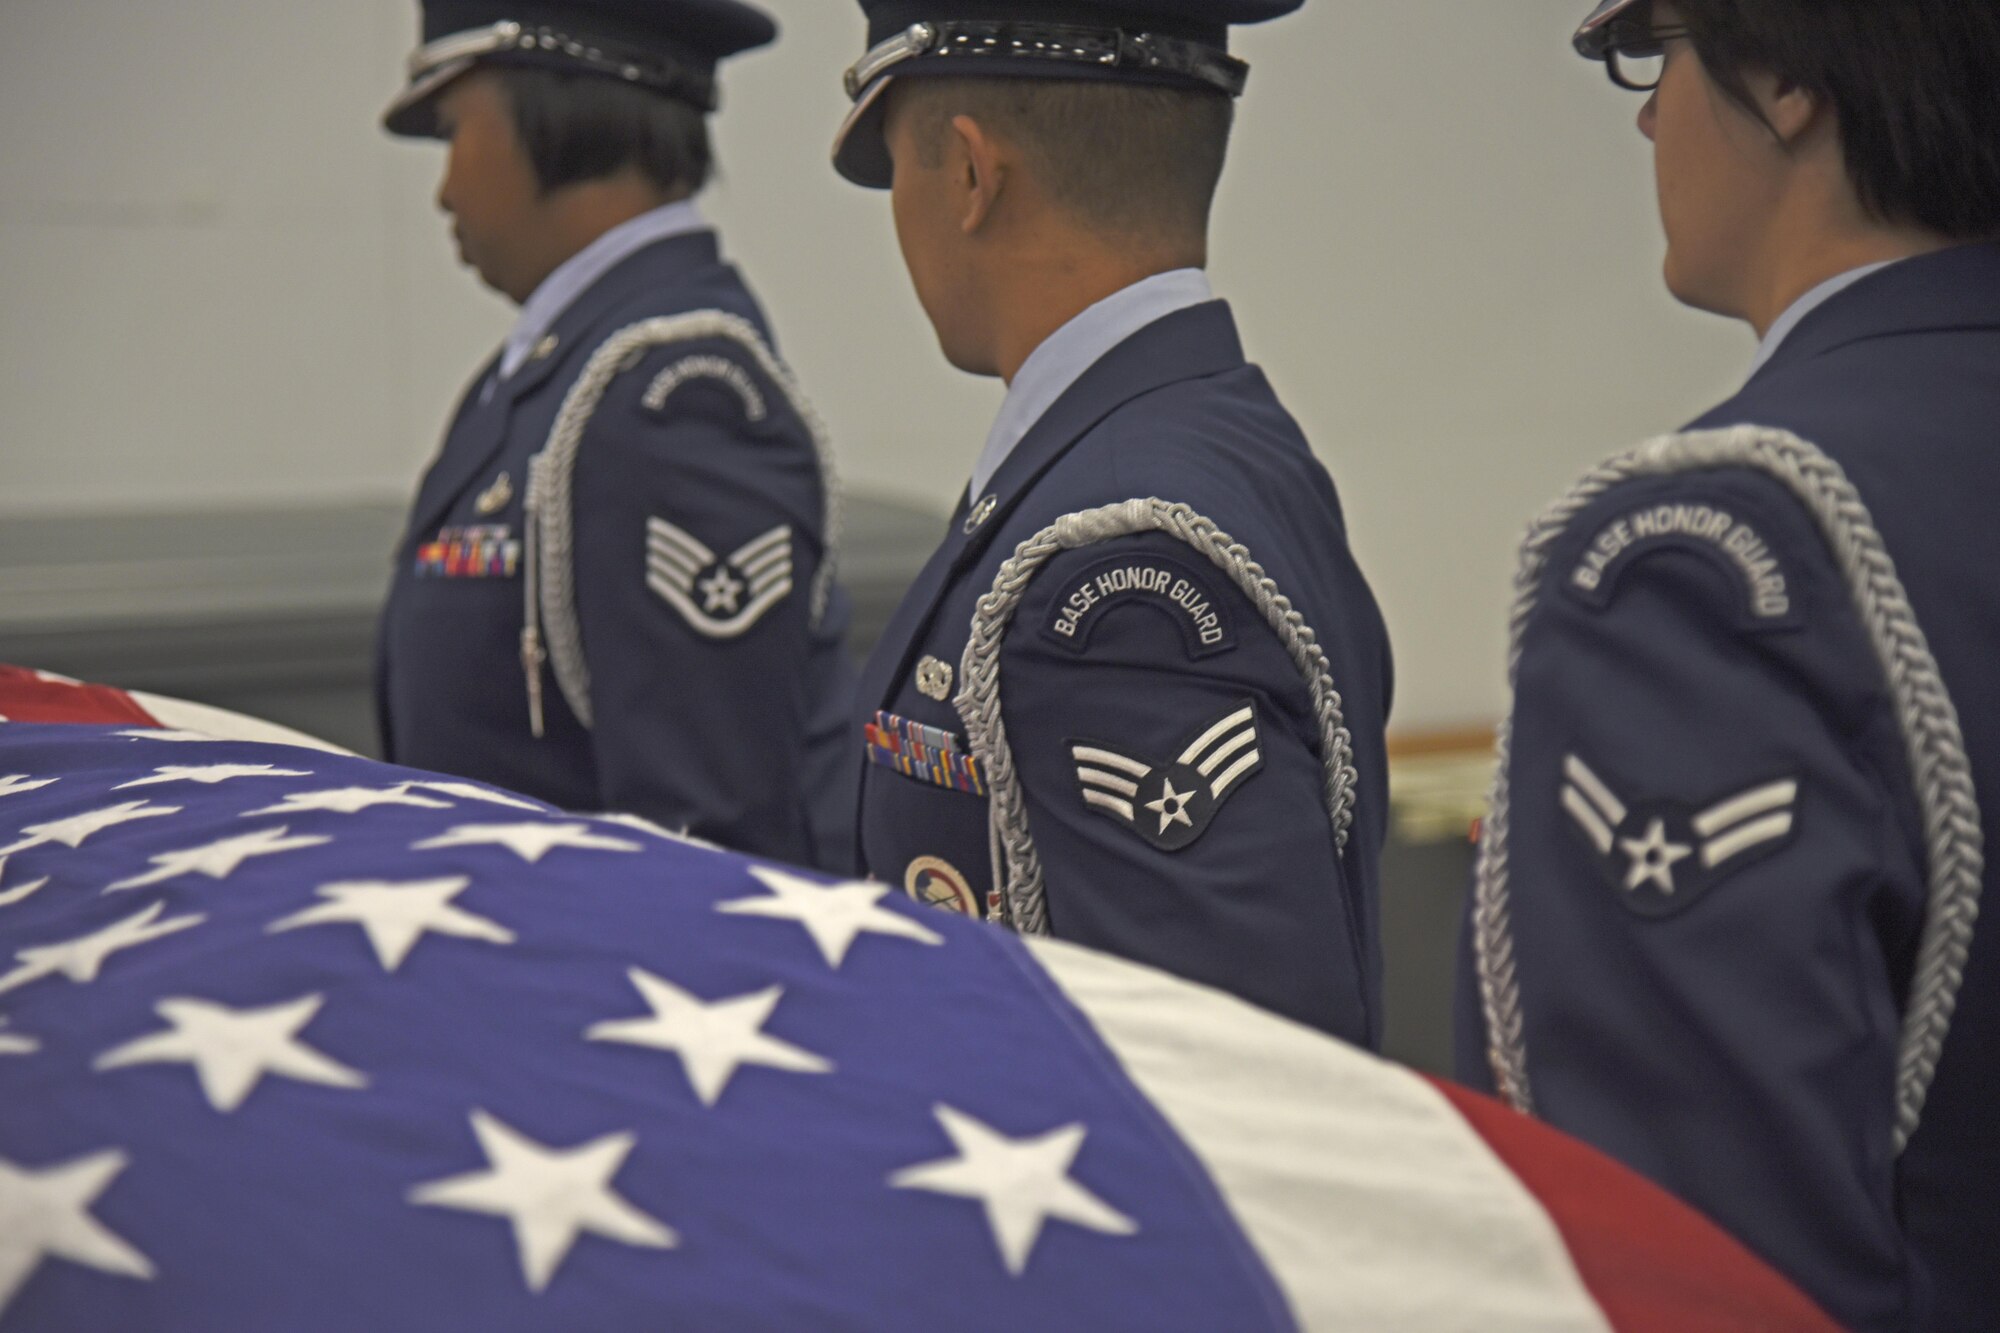 The Fairchild Honor Guard conducts military funeral training Nov. 16, 2017, at Fairchild Air Force Base, Washington. Honor guard’s mission is unlike any other, spending upward of 60 hours a week together traveling, training and preparing for ceremonies. With an average of more than 300 military funerals a year, both active duty and veteran, the long hours, constant attention to detail and training can begin to take their toll physically and mentally.(U.S. Air Force photo/Senior Airman Mackenzie Richardson)